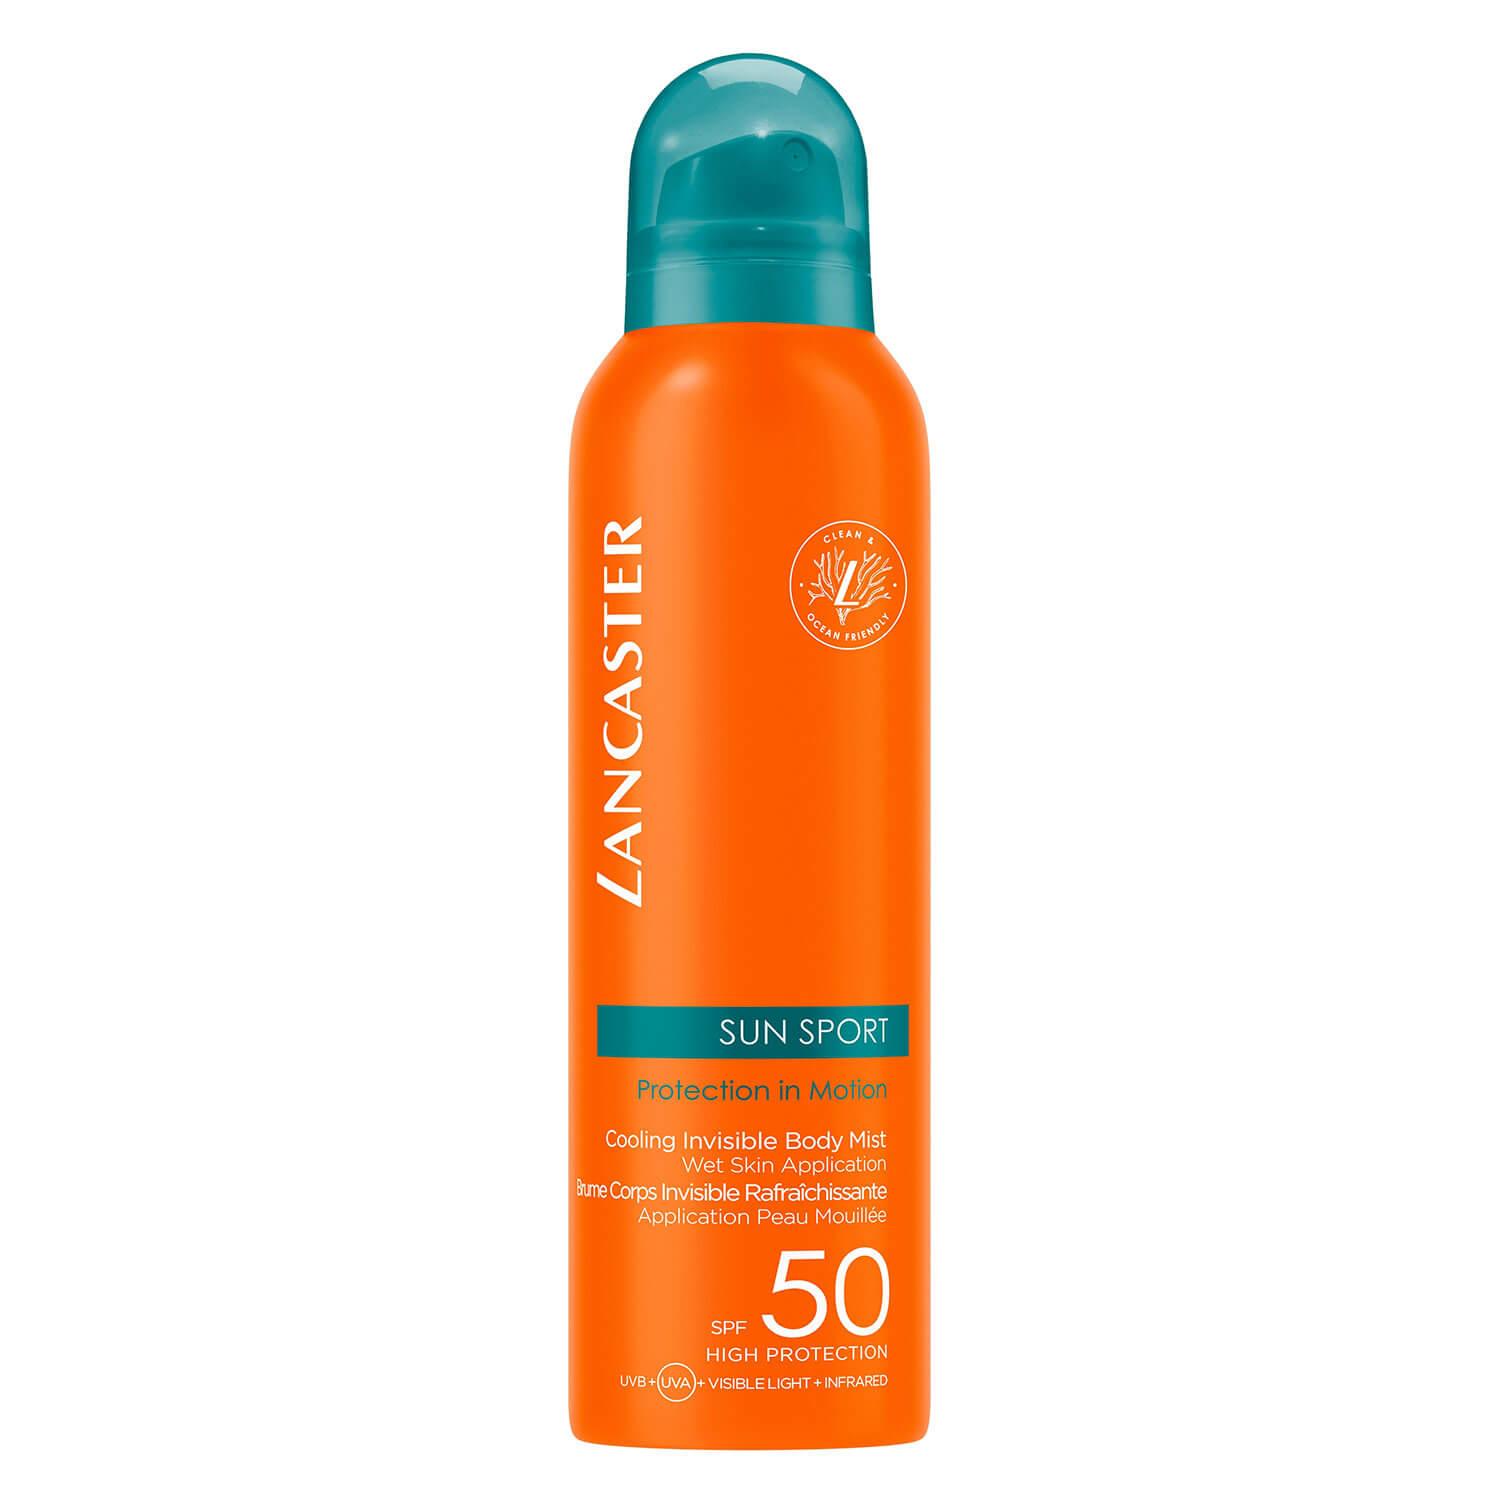 Sun Sport - Cooling Invisible Body Mist SPF50